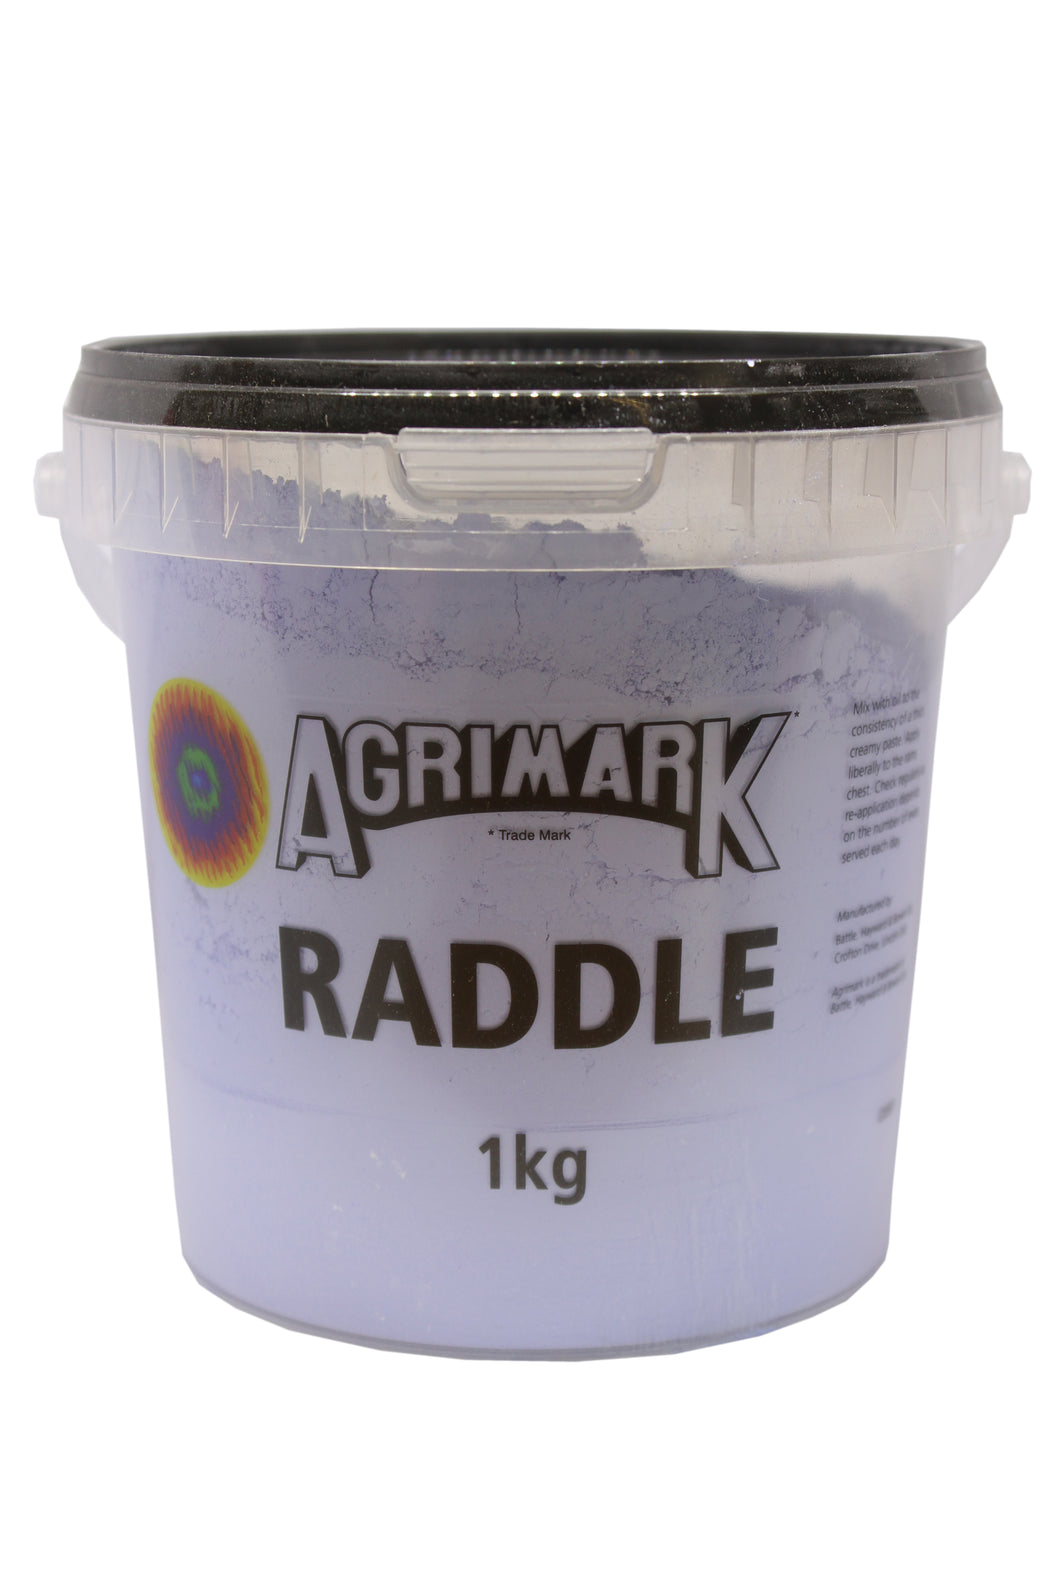 Agrimark ram raddle 1kg (Special Offer) - Sheepproducts.ie